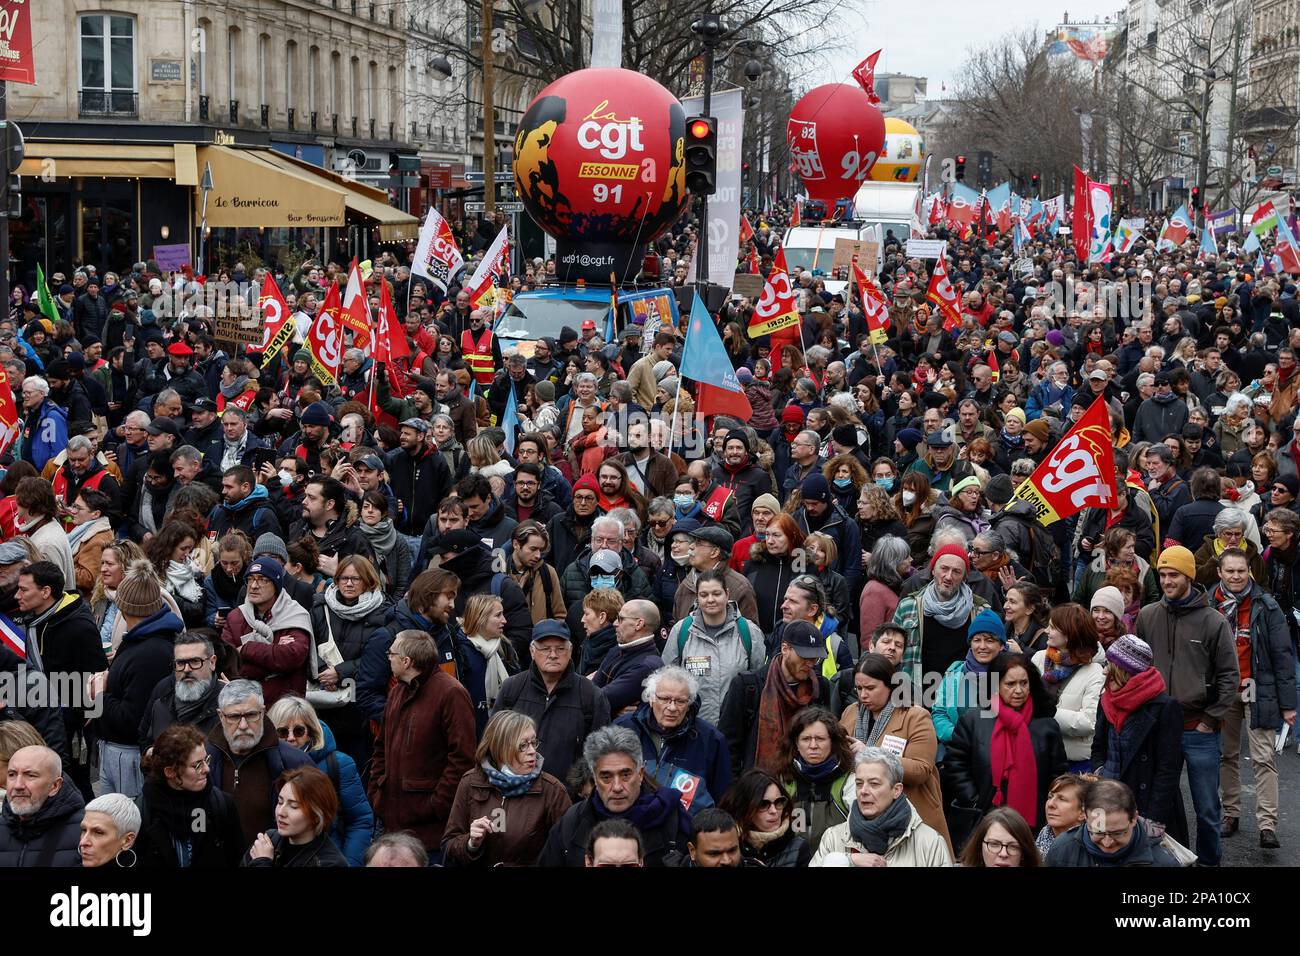 General Confederation of Labour (CGT) trade union logos are seen as demonstrators march against the government's pension reform plan in Paris, France, March 11, 2023. REUTERS/Benoit Tessier Stock Photo